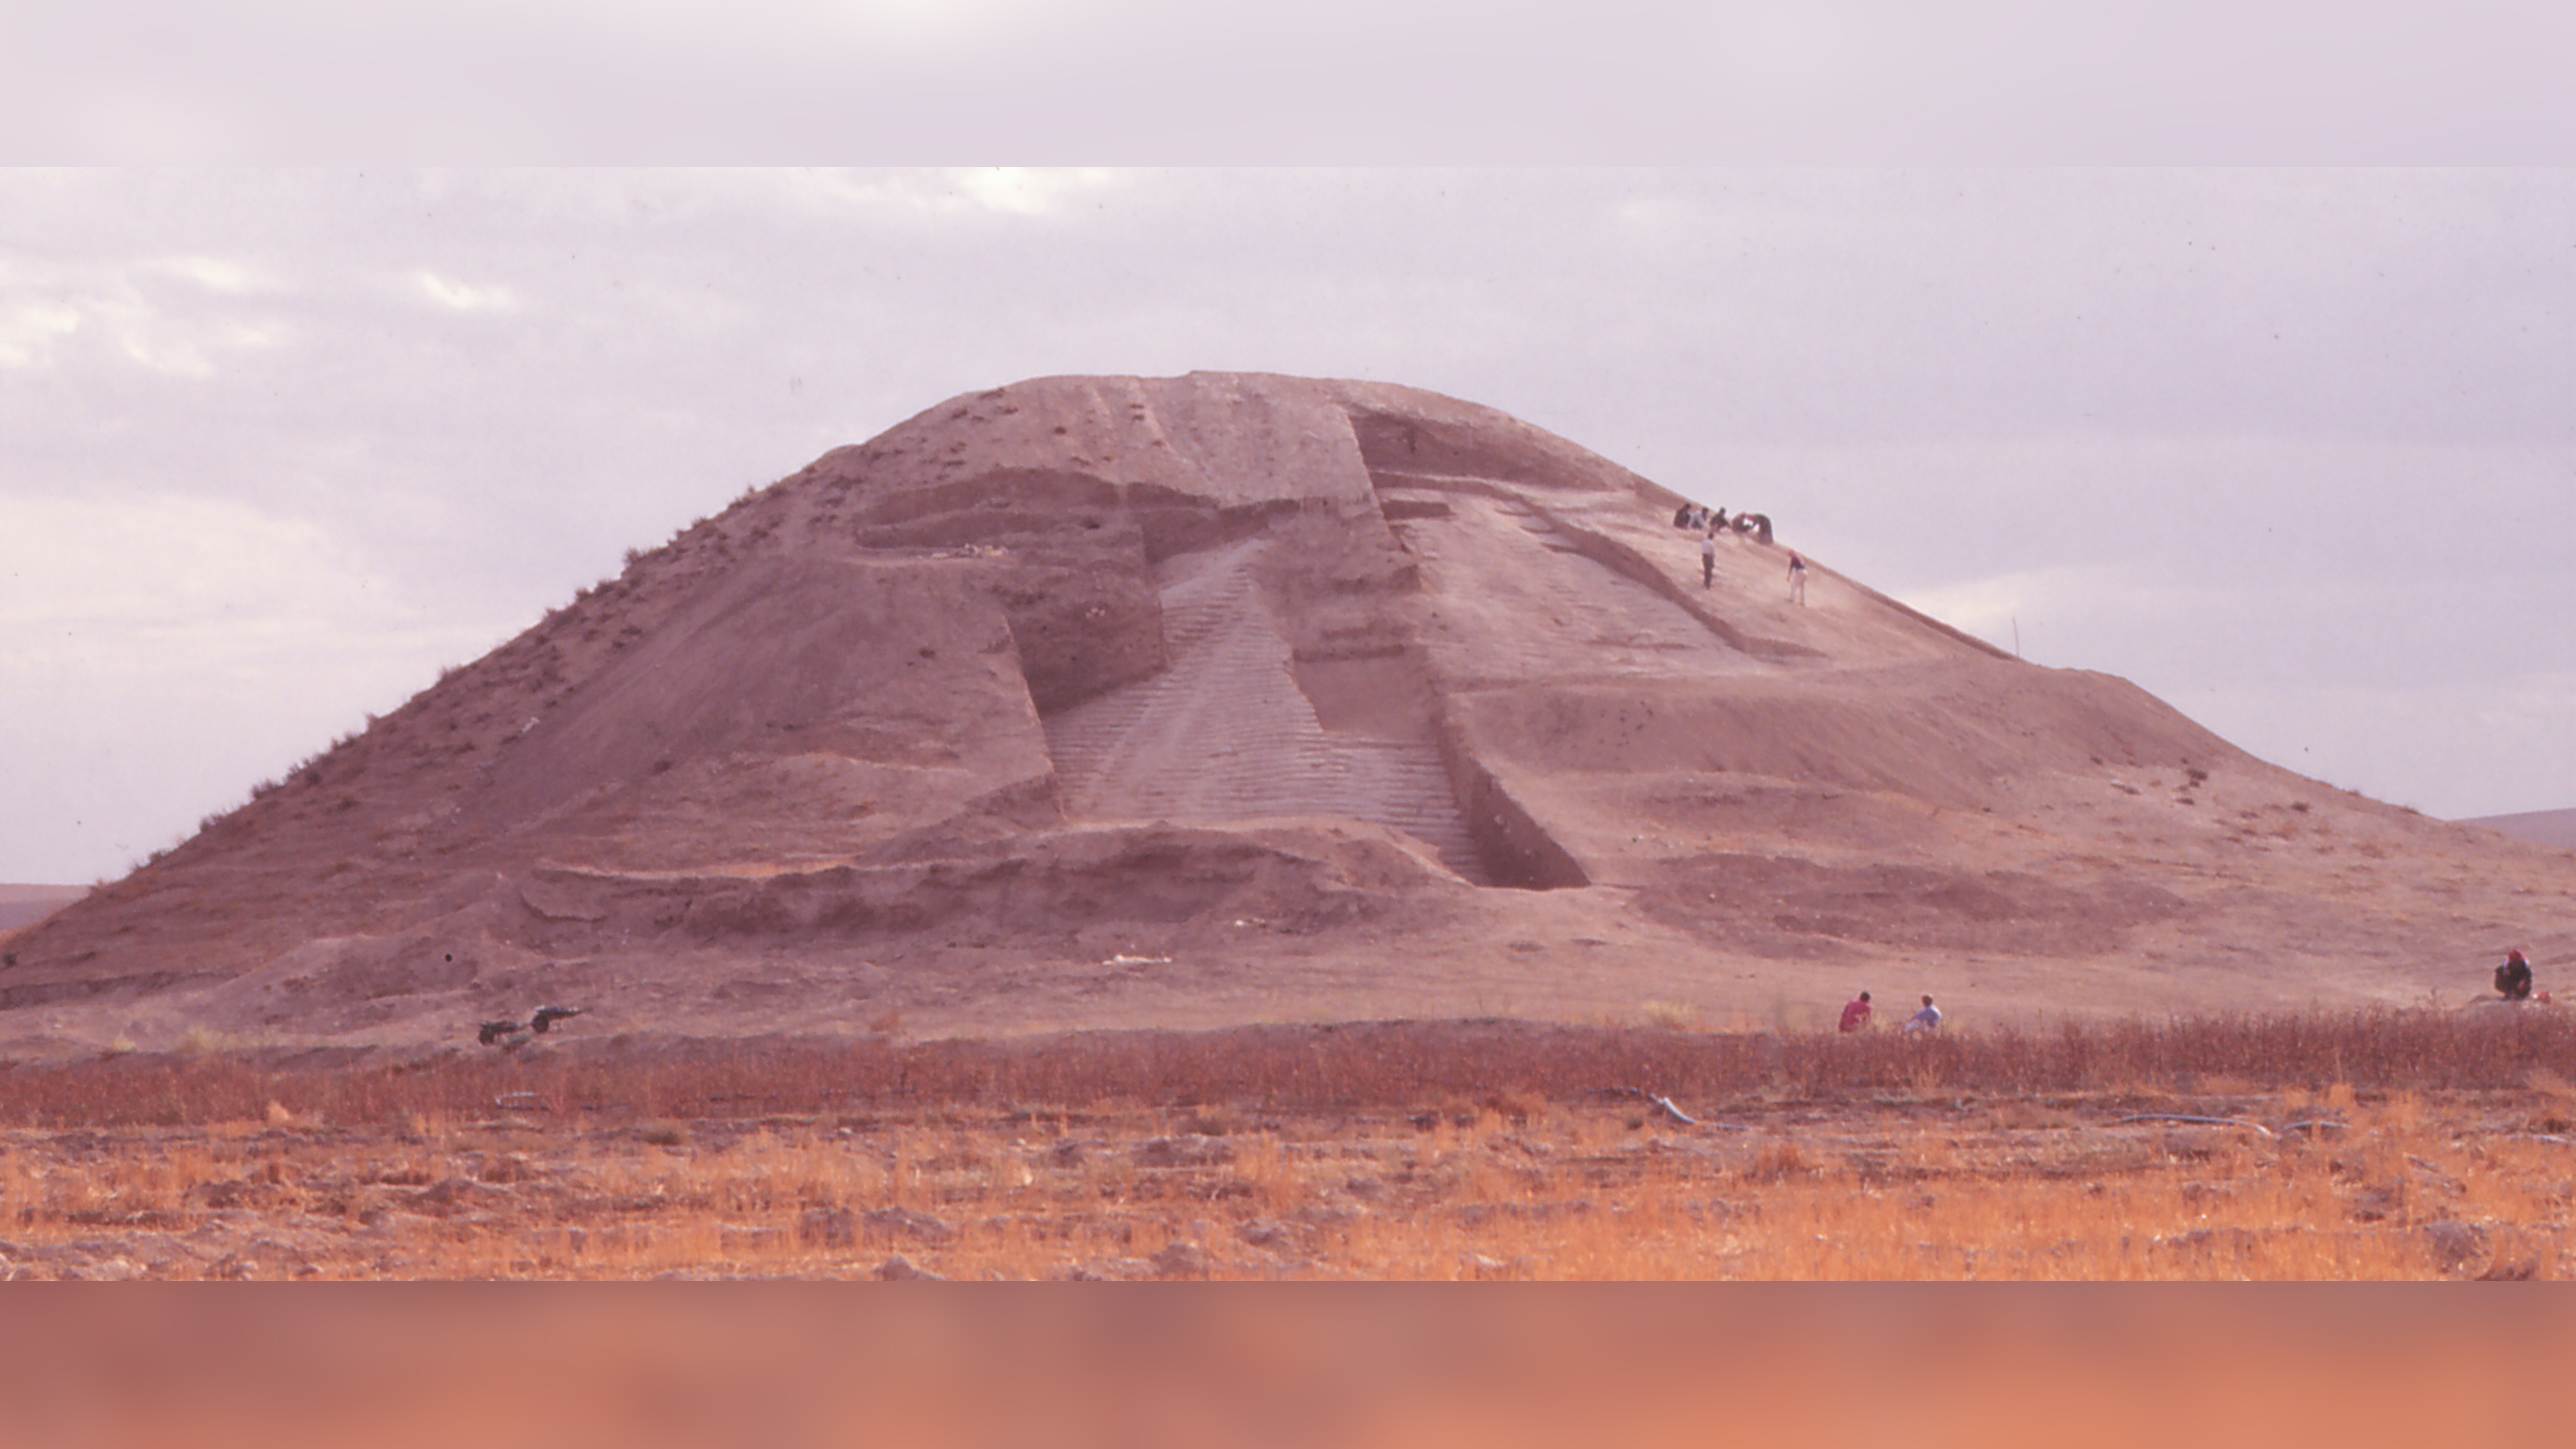 The ancient war monument looked a bit like the step pyramid of Djoser in Egypt.